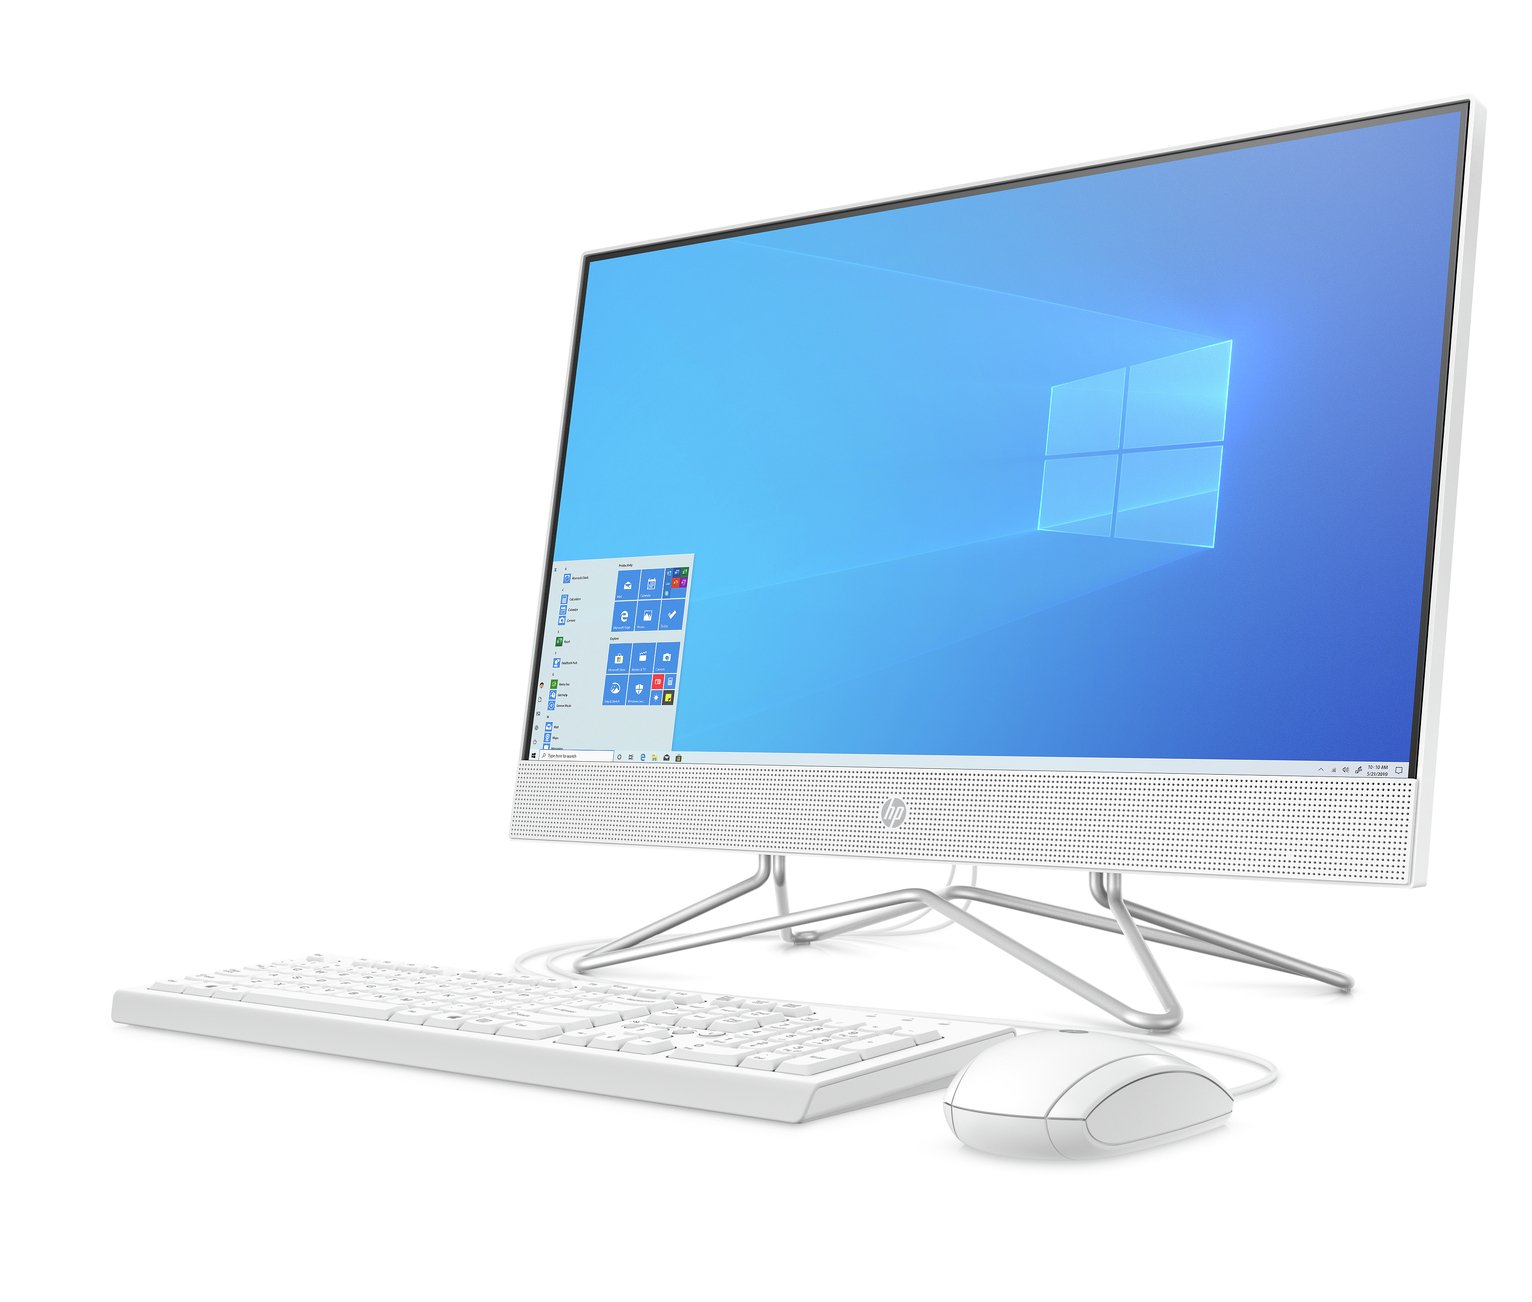 HP 24in Pentium 4GB 1TB All-in-One PC Review